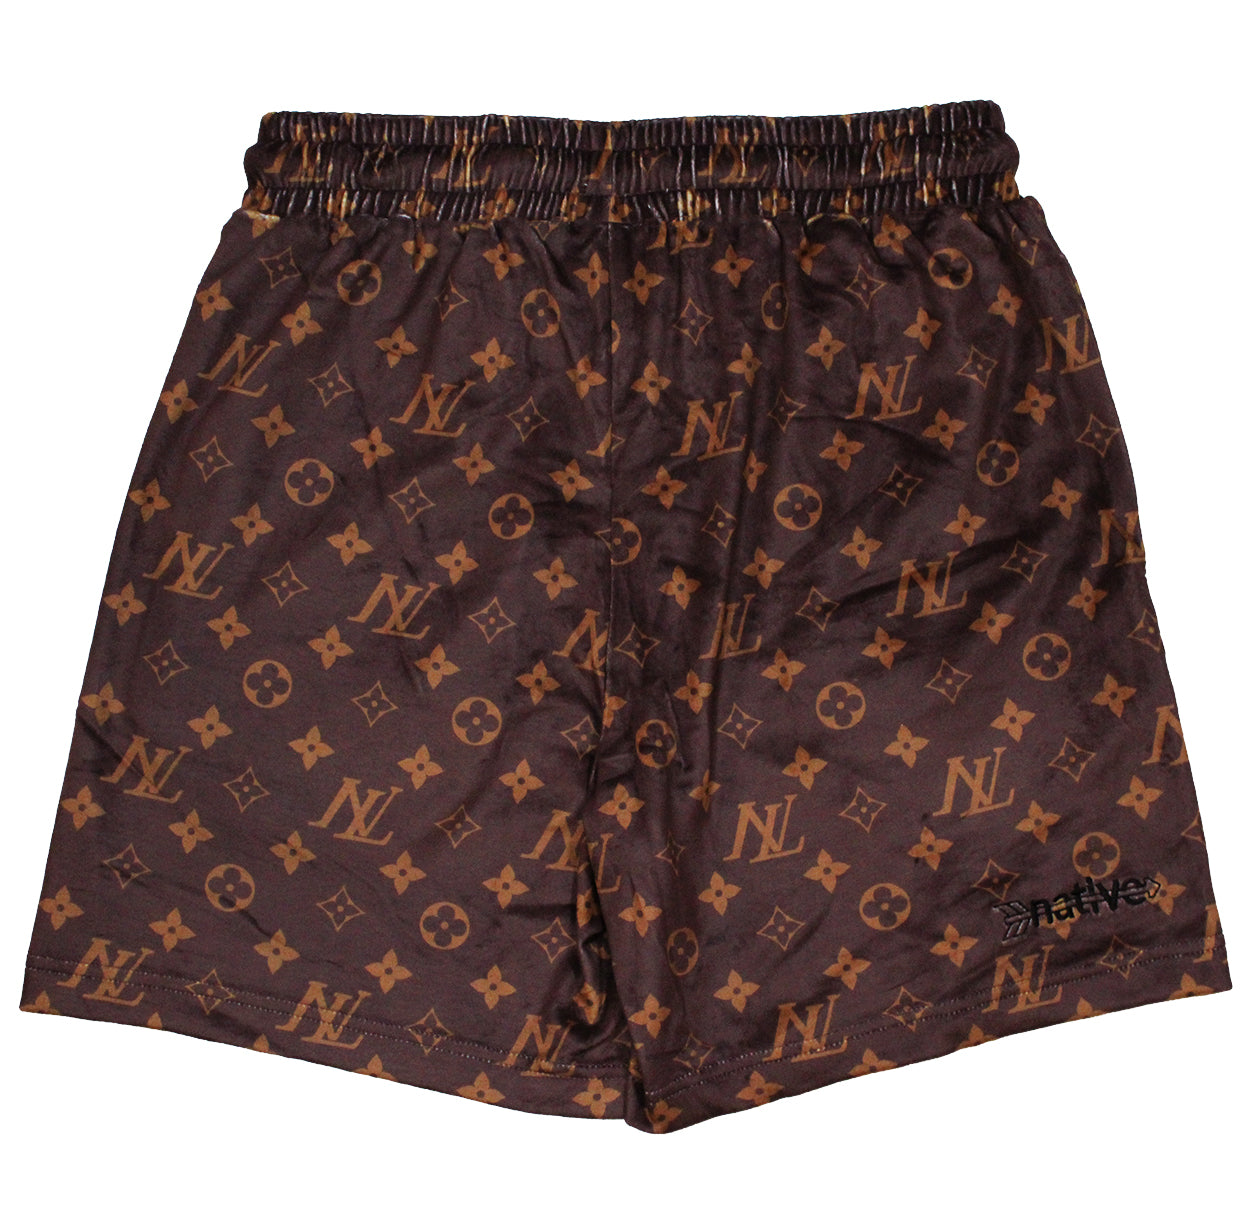 nl velour shorts in brown/gold